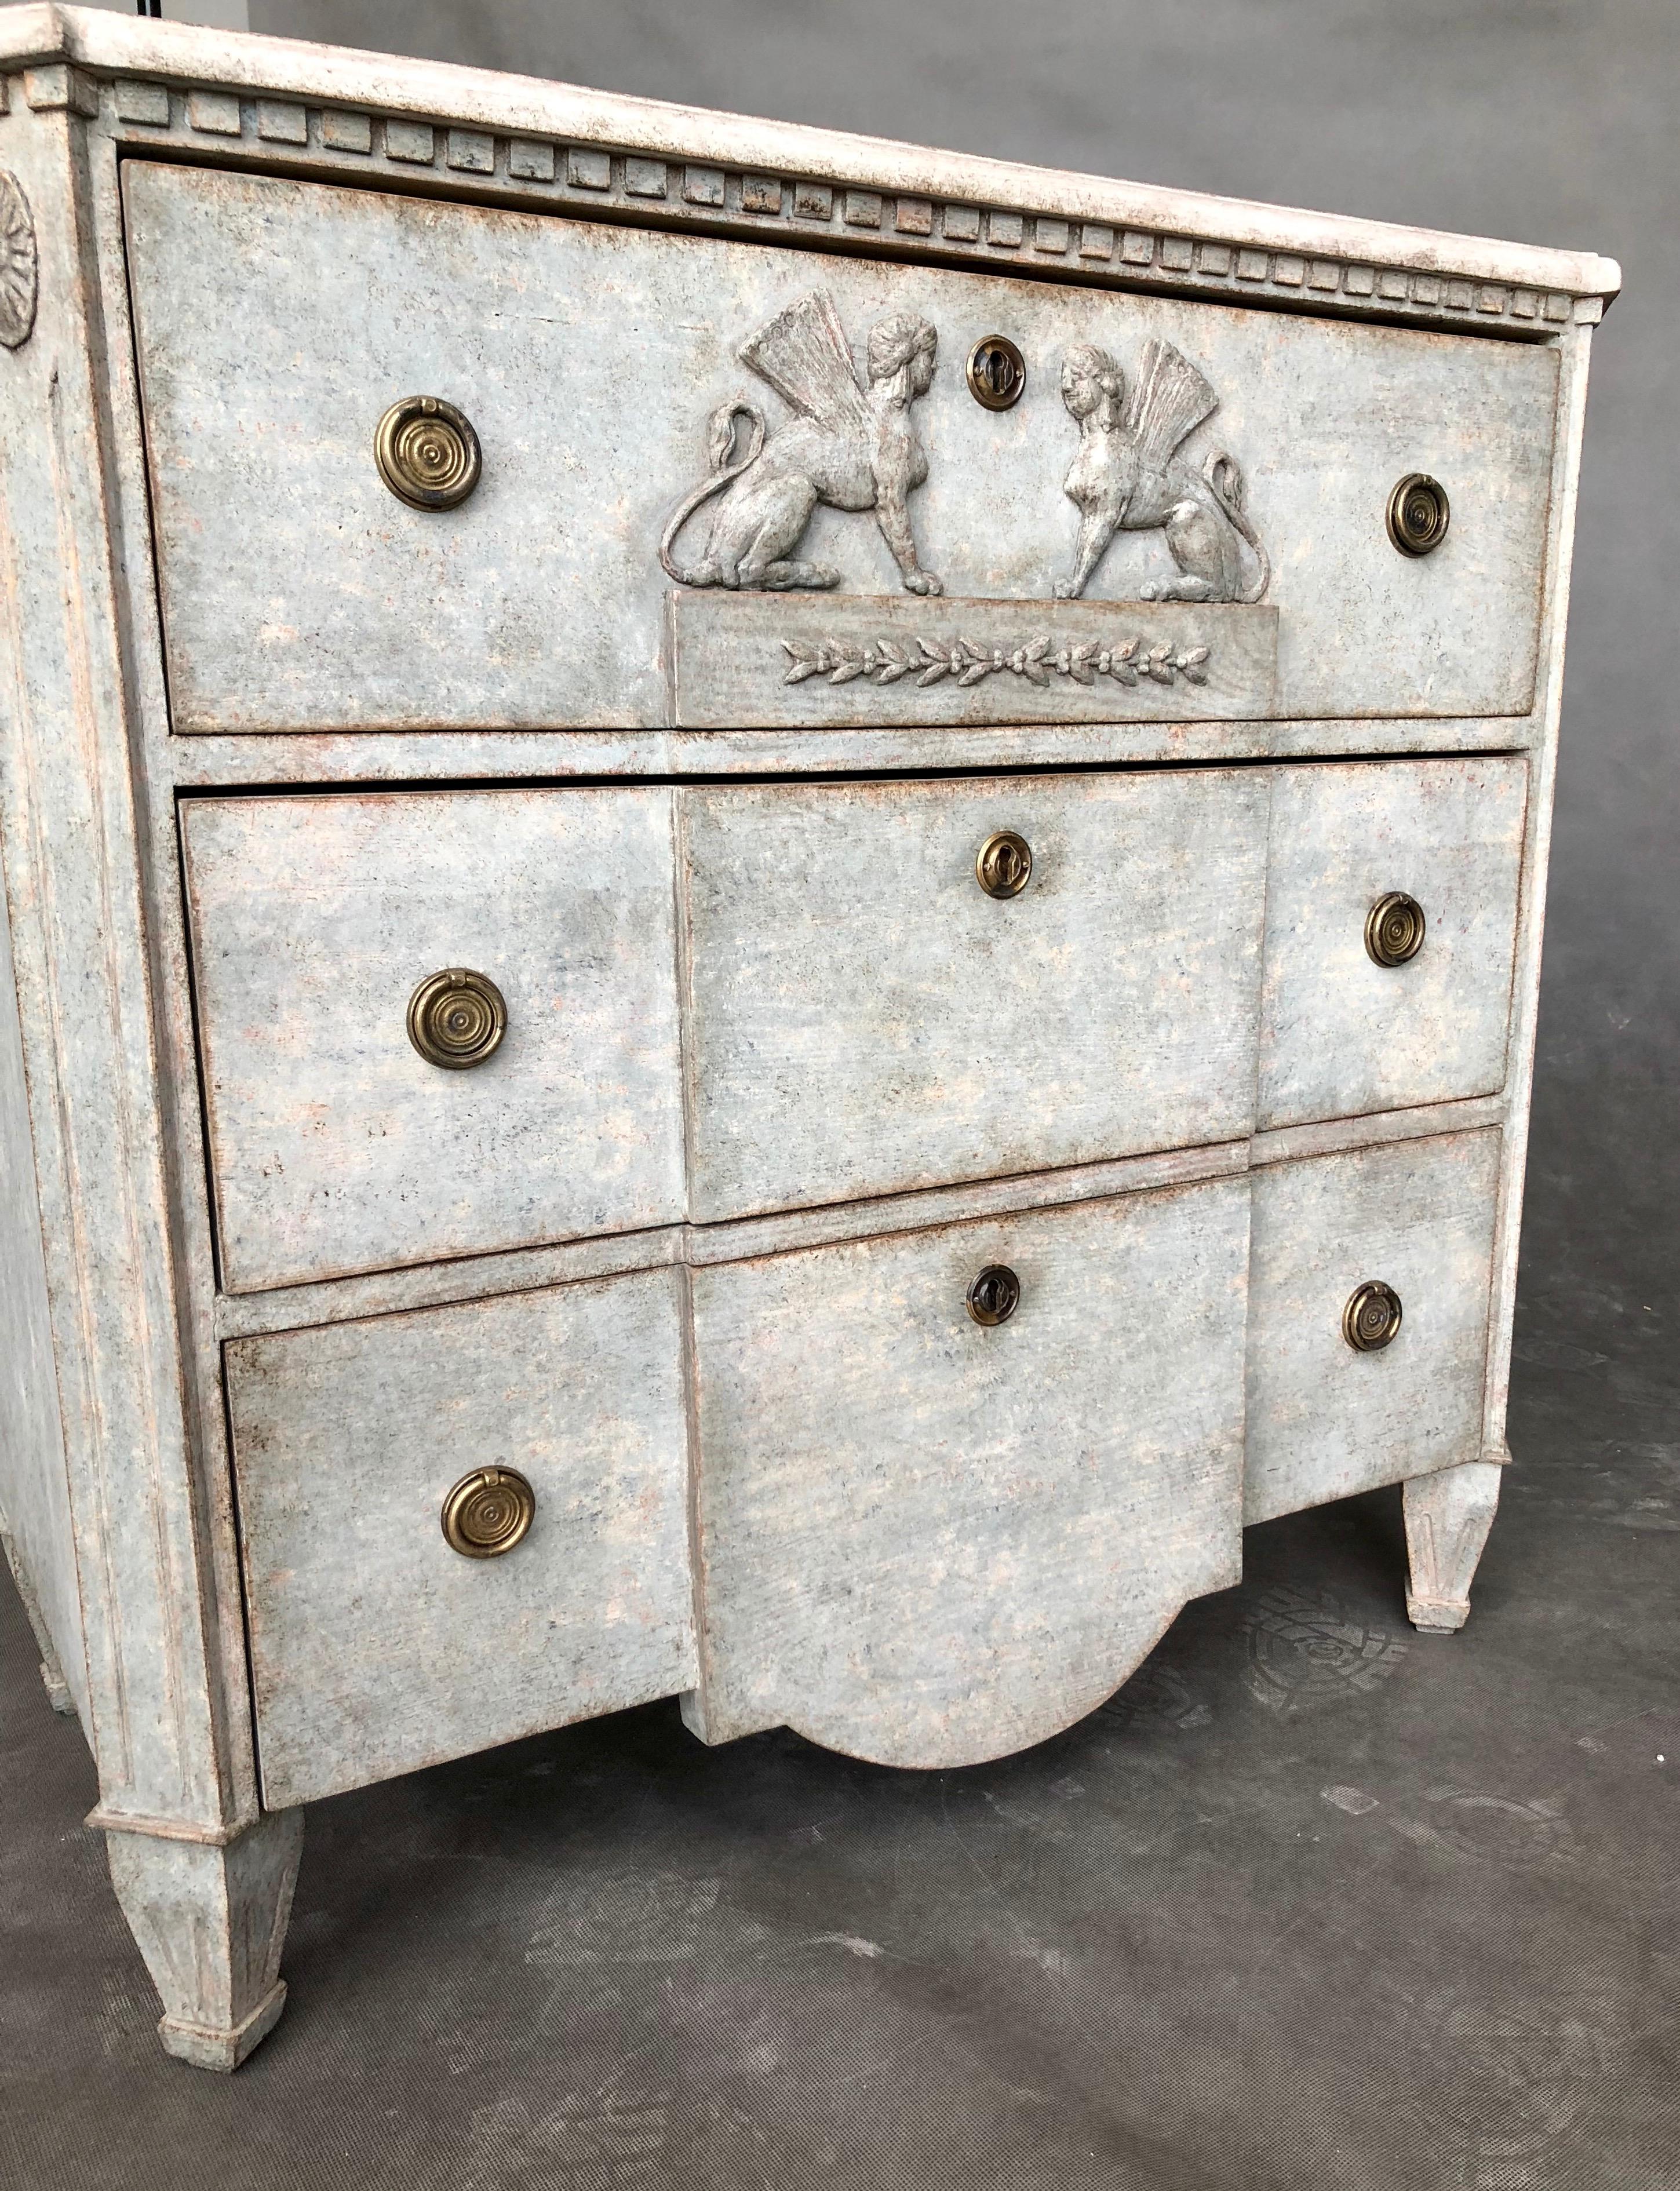 This is a neoclassical chest of drawers with a break front in gray color. The upper part of the furniture is decorated teeth. The corners are cut and there are vertical cutters and decorations on them. On the top drawer are sphinxes and subtle